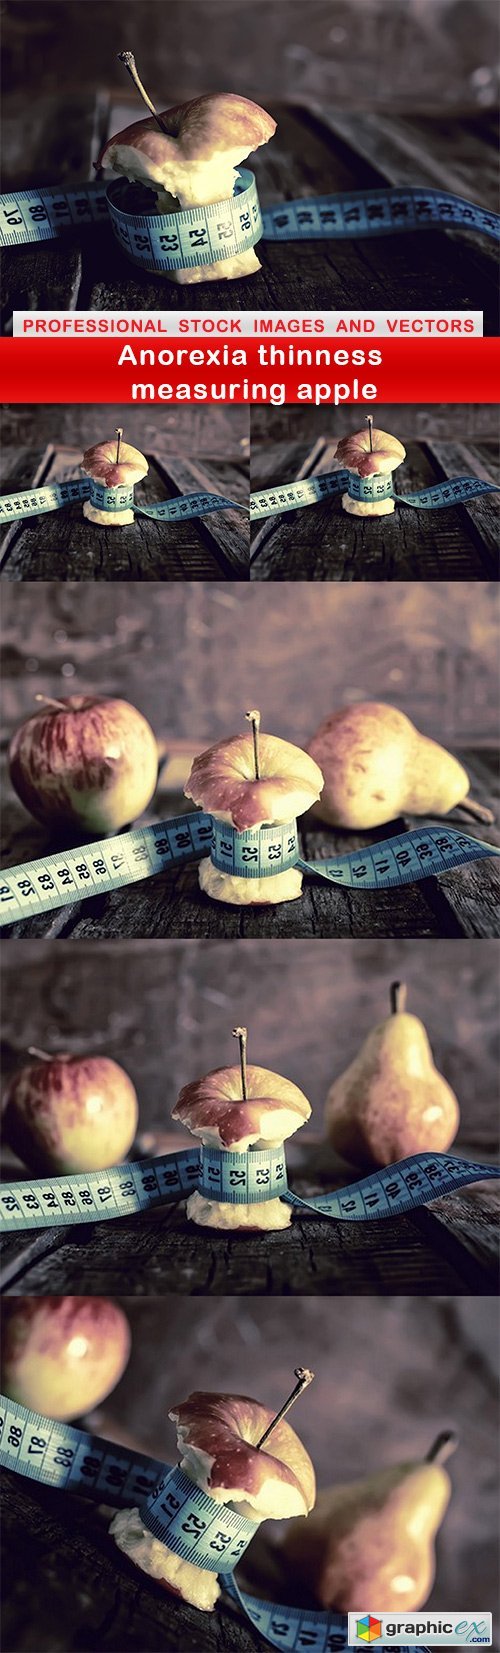 Anorexia thinness measuring apple - 6 UHQ JPEG